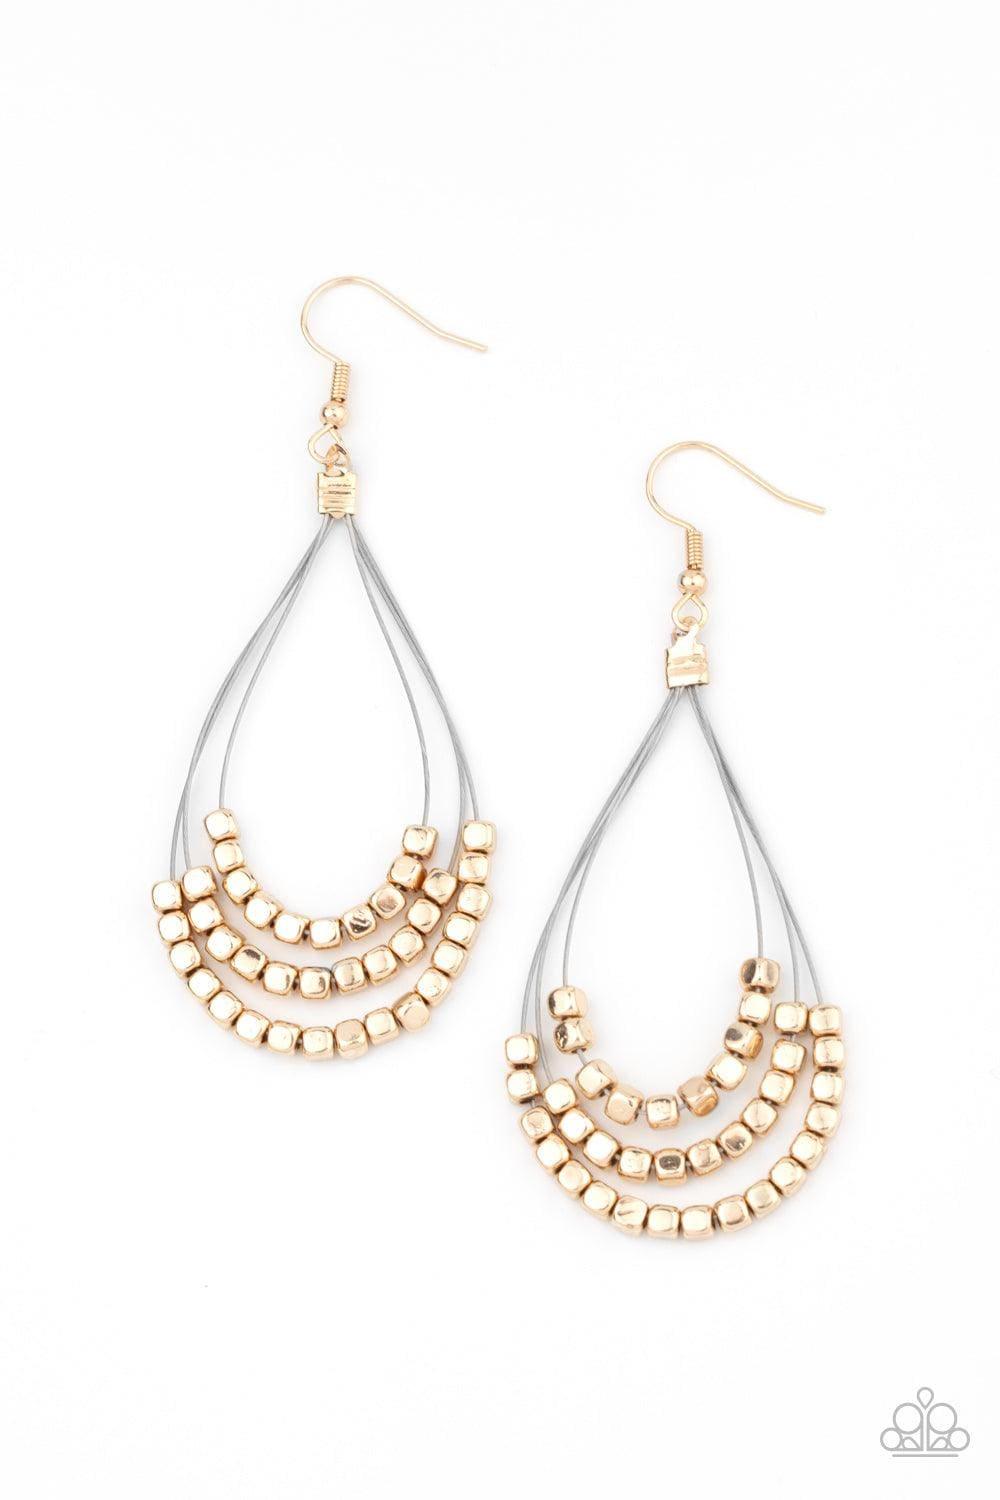 Paparazzi Accessories - Off The Blocks Shimmer - Gold Earrings - Bling by JessieK